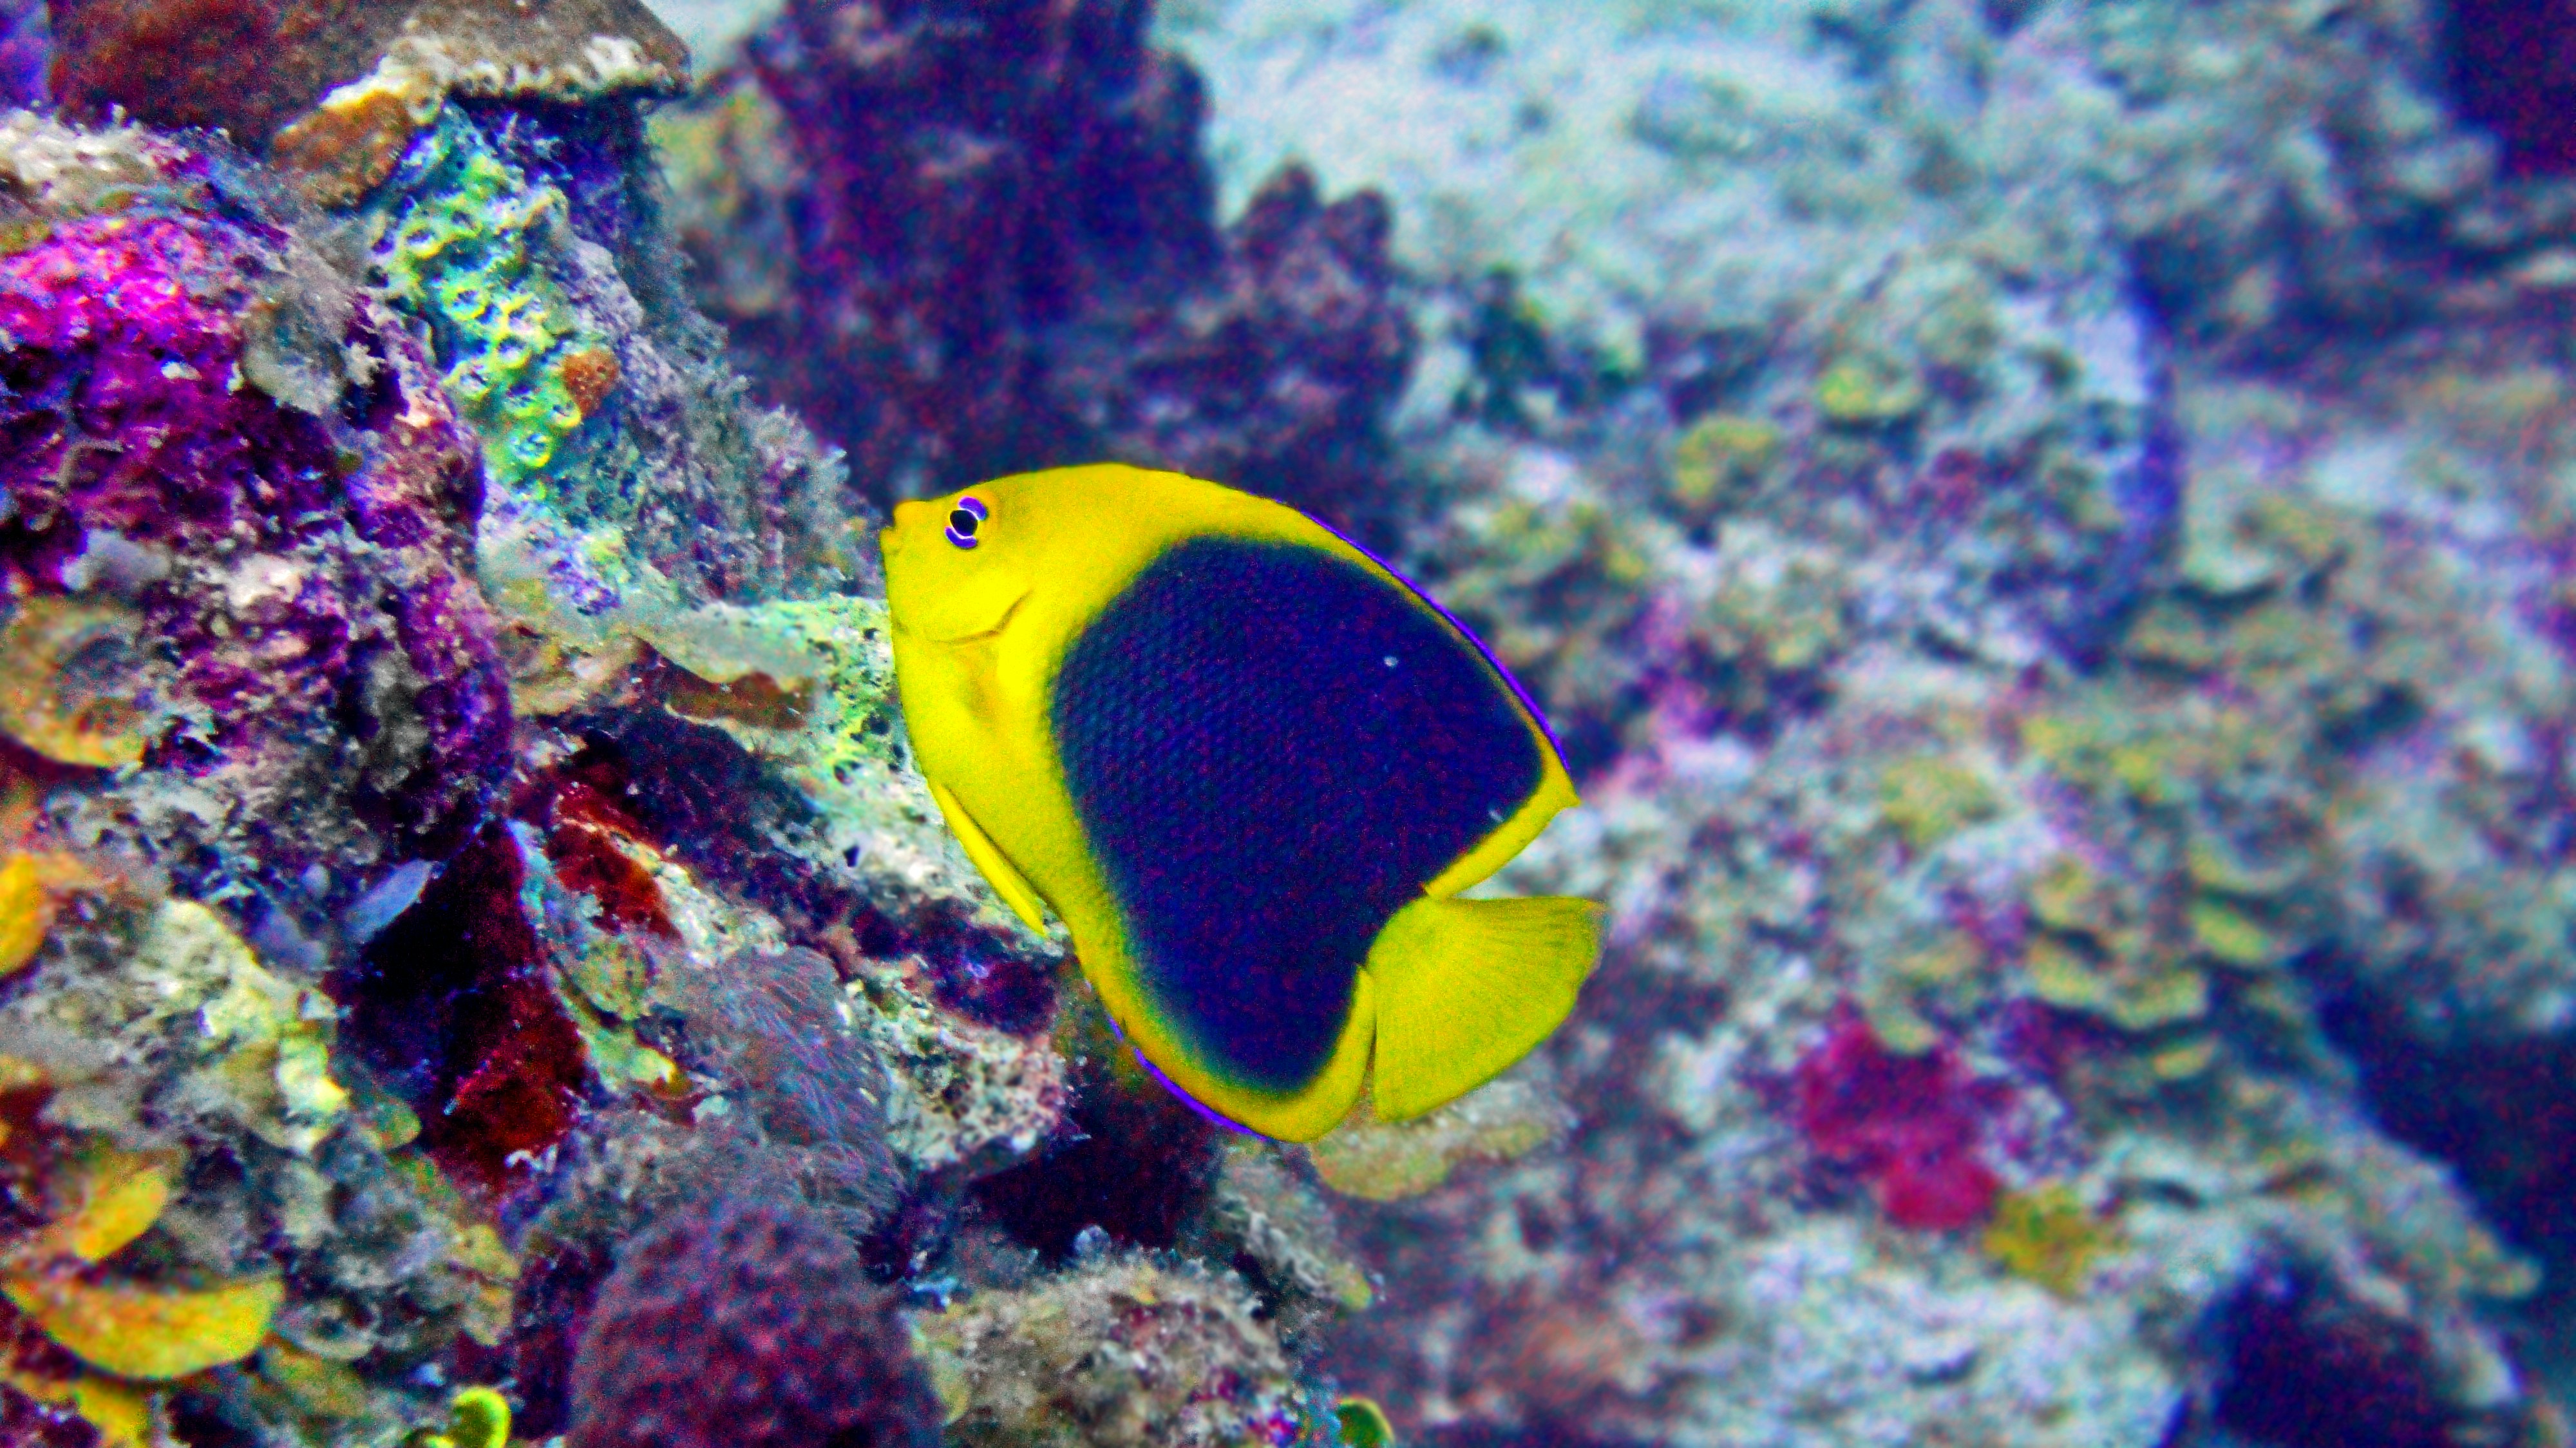 A Rock Beauty angelfish drifts over a coral reef.